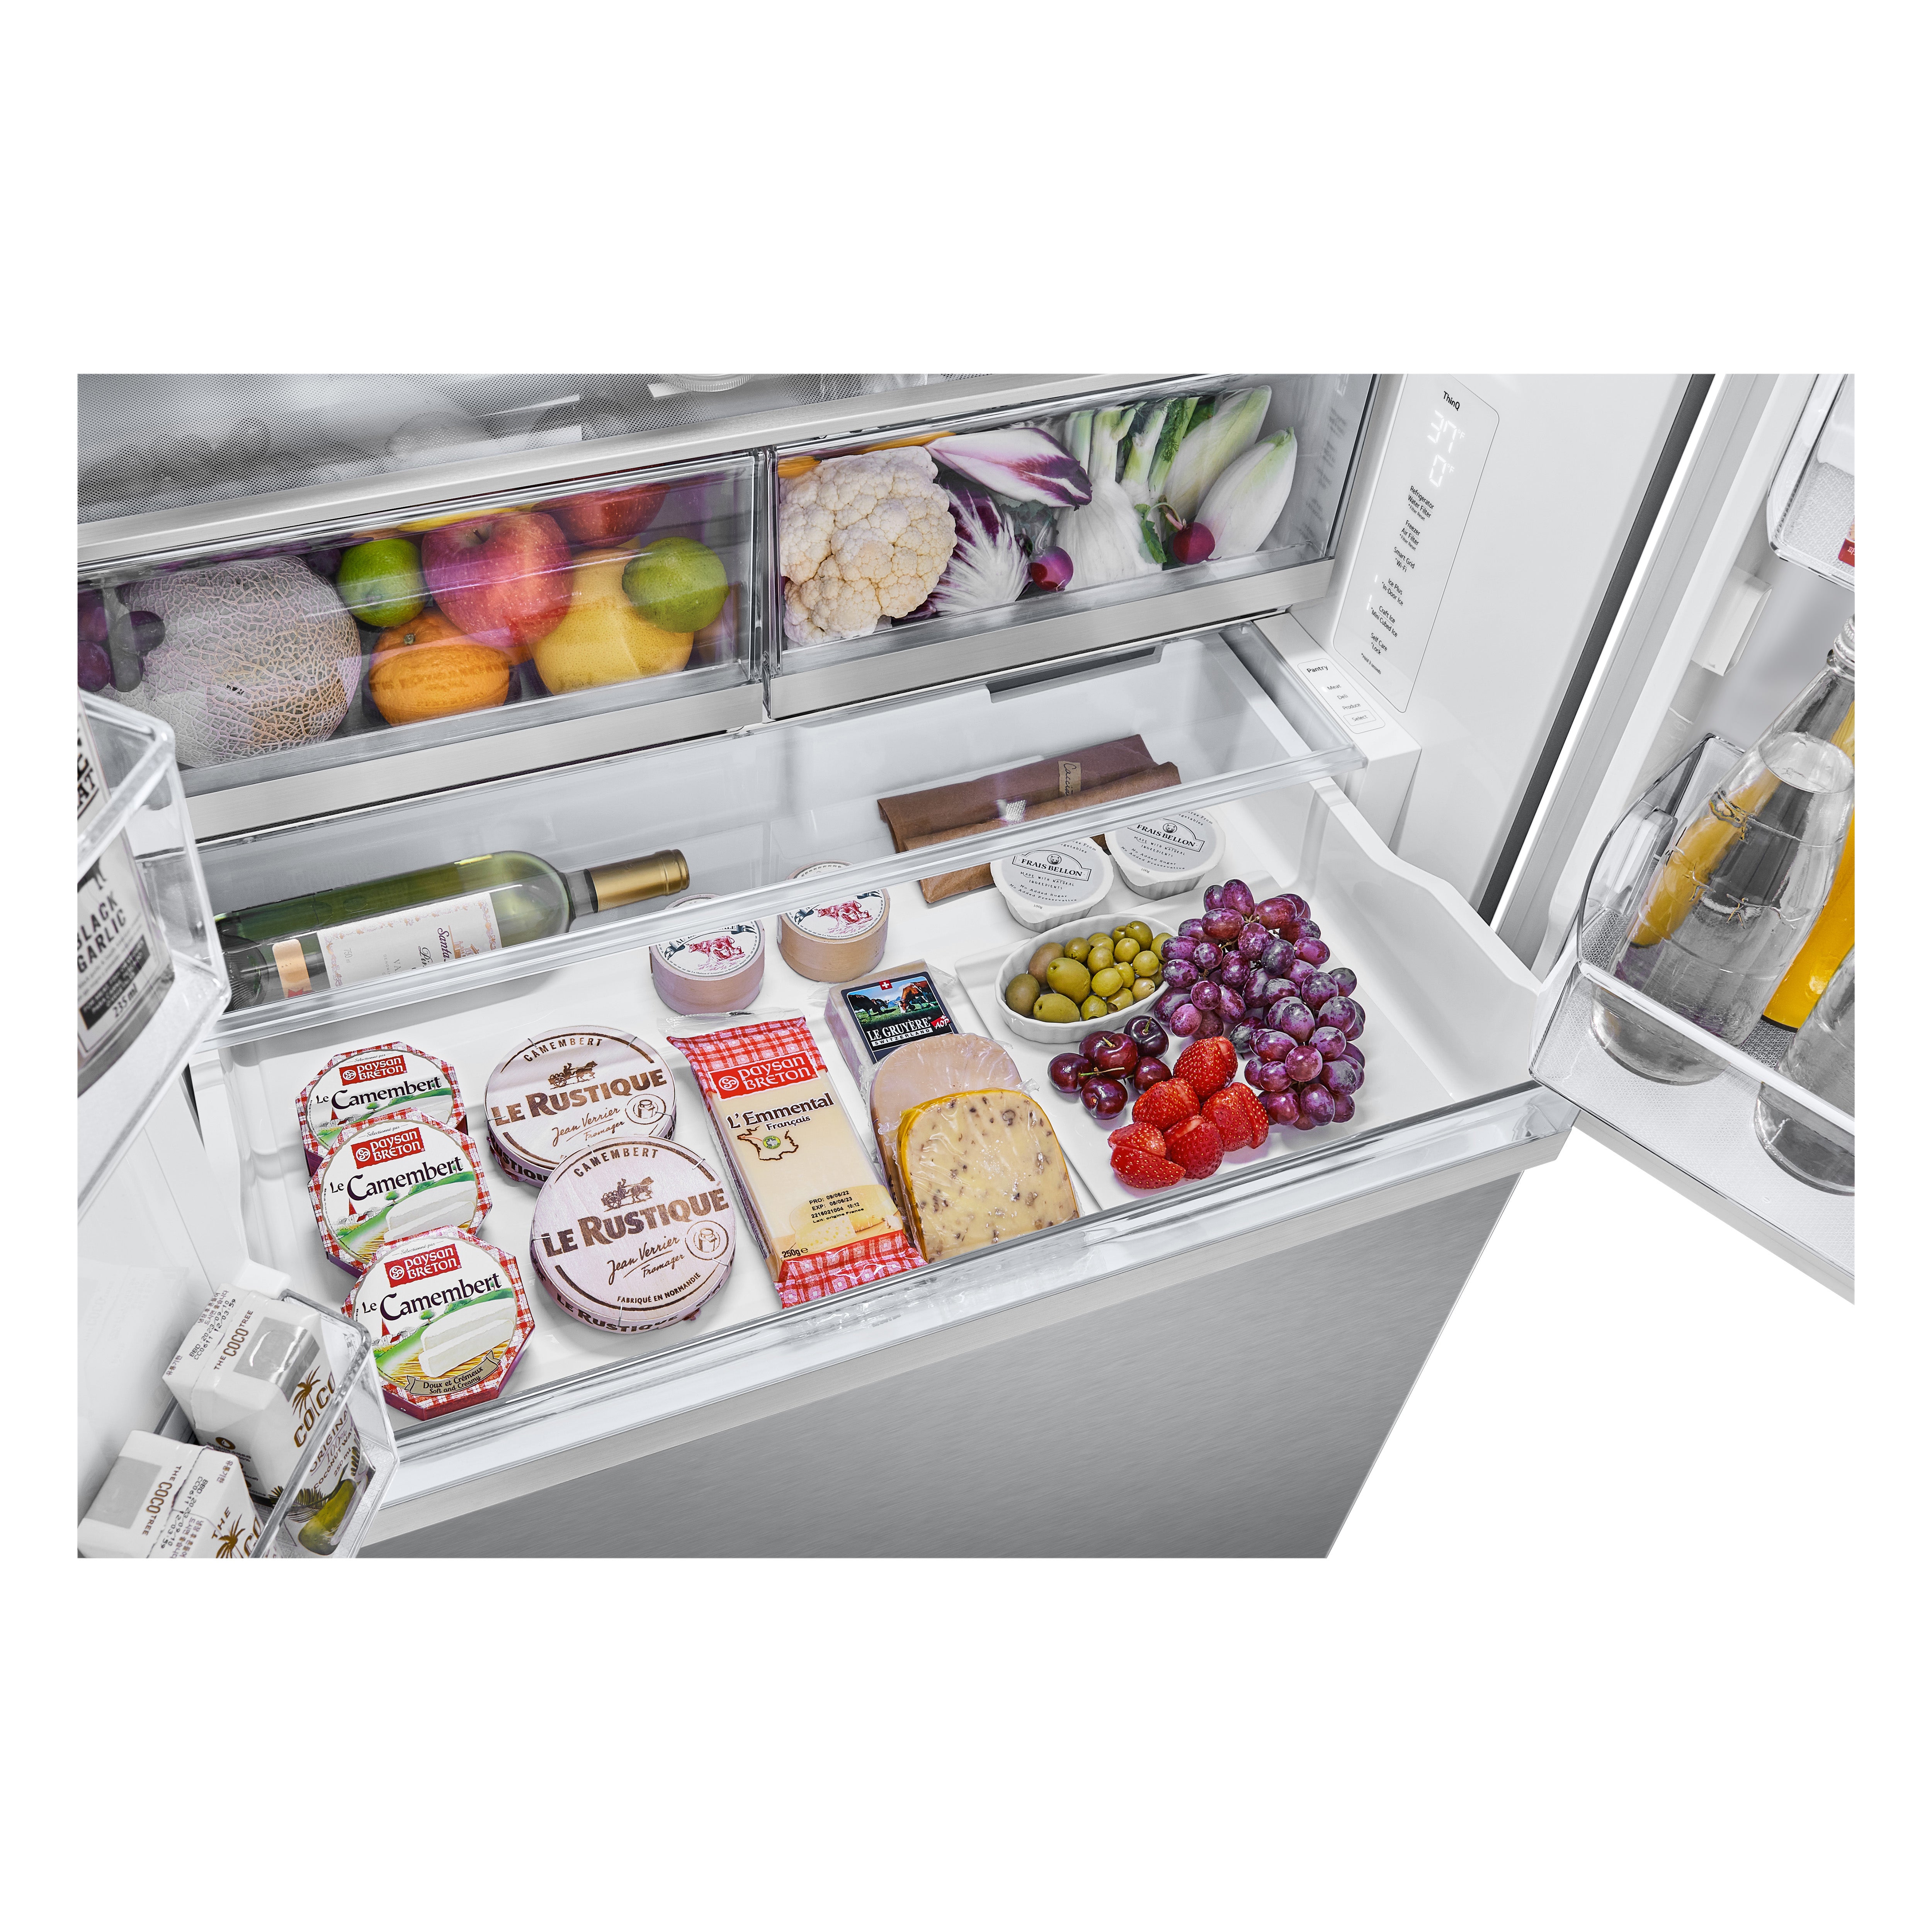 LG - 35.8 Inch 30.7 cu. ft French Door Refrigerator in Stainless - LRYXS3106S